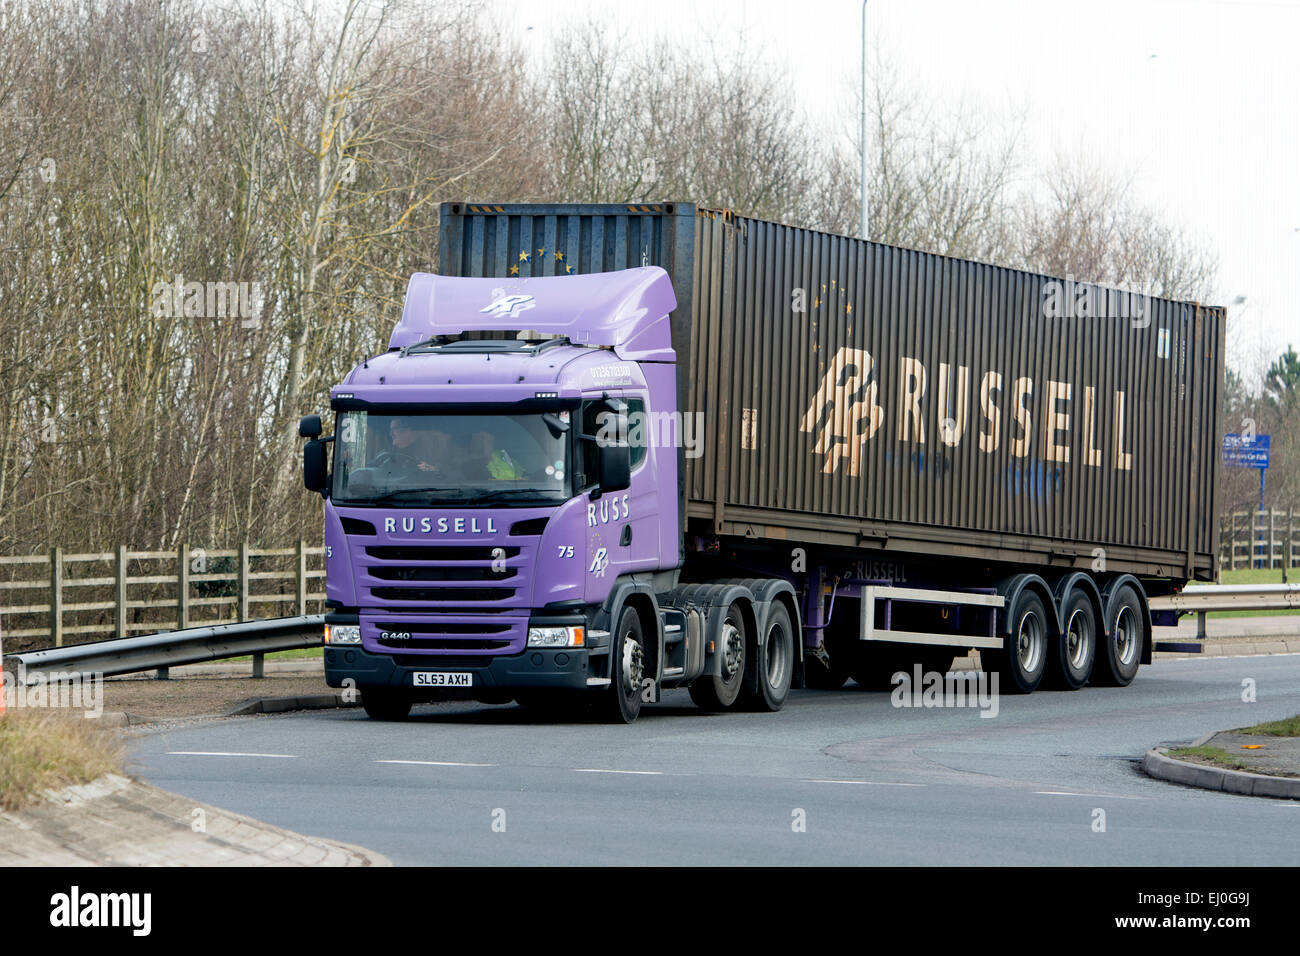 Russell container lorry at DIRFT, Daventry, UK Stock Photo